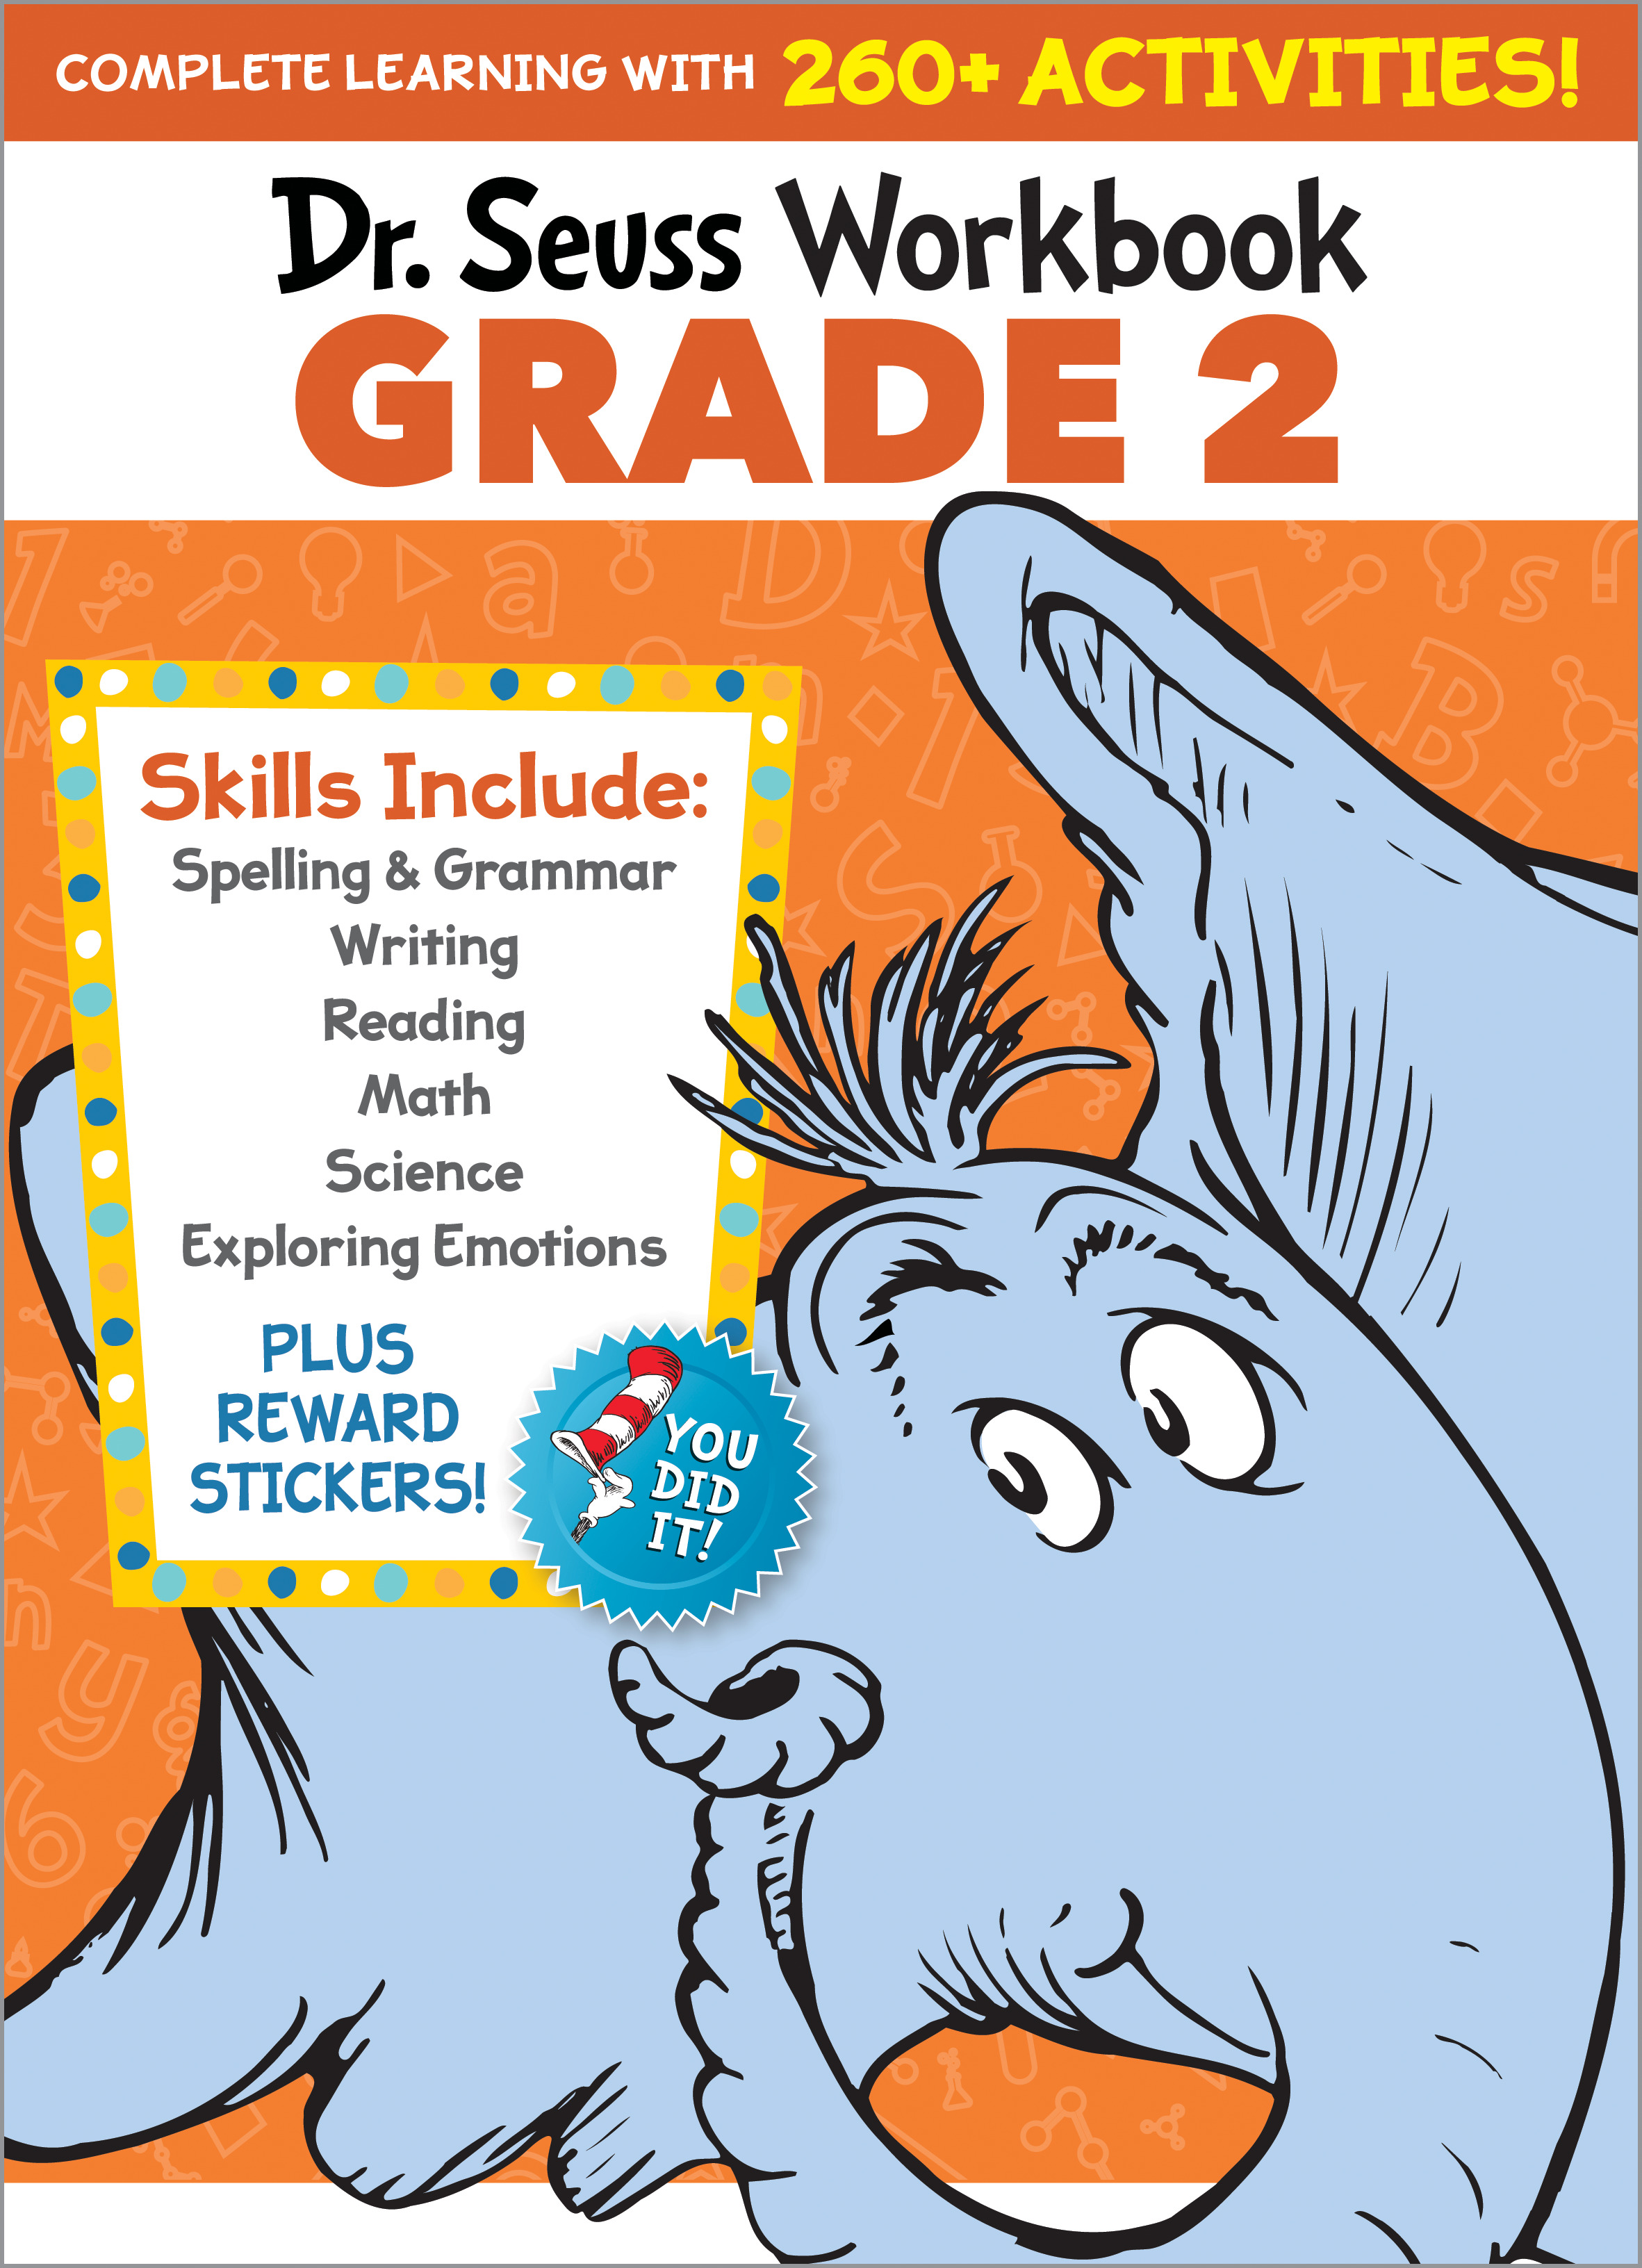 Dr. Seuss Workbook: Grade 2 : 260+ Fun Activities with Stickers and More! (Spelling, Phonics, Reading Comprehension, Grammar, Math, Addition &amp; Subtraction, Science) | Dr. Seuss